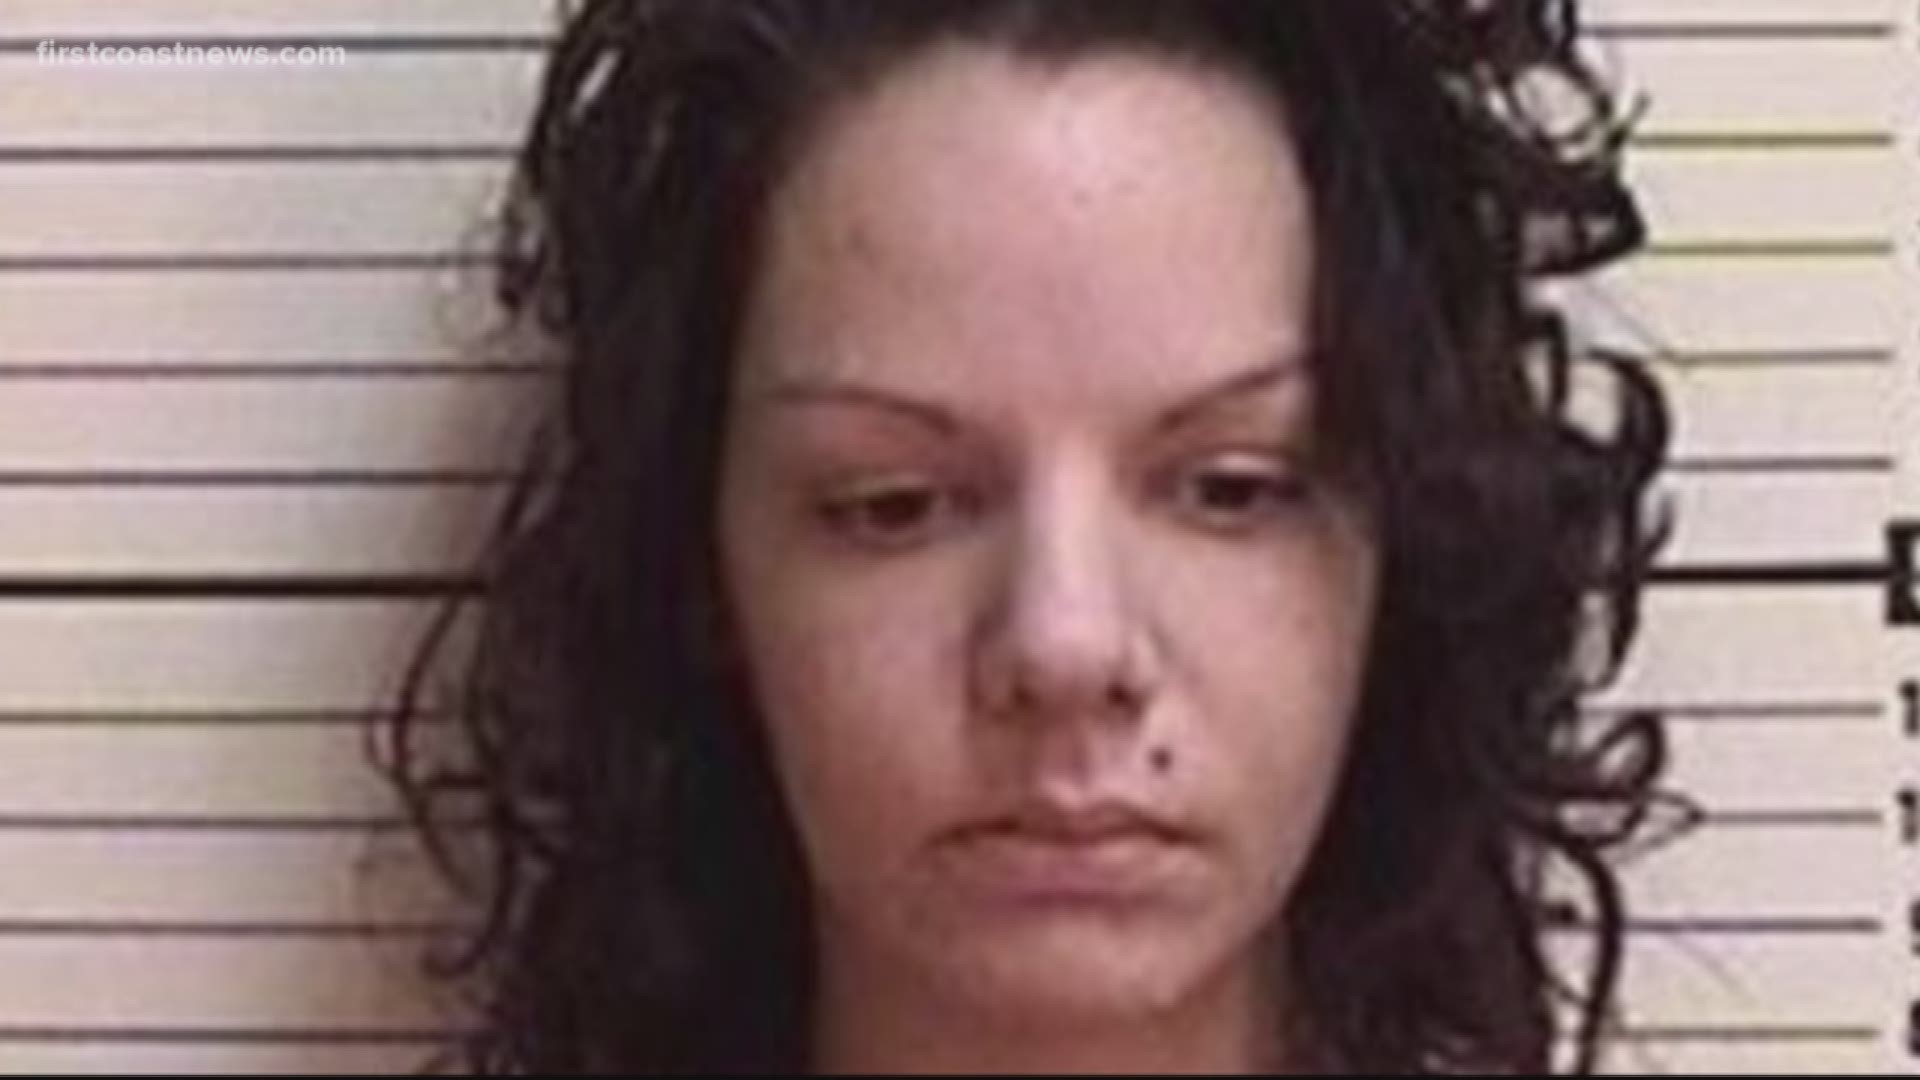 The mother initially charged with involuntary manslaughter after the death of her 7-month-old is now being charged with second-degree murder.